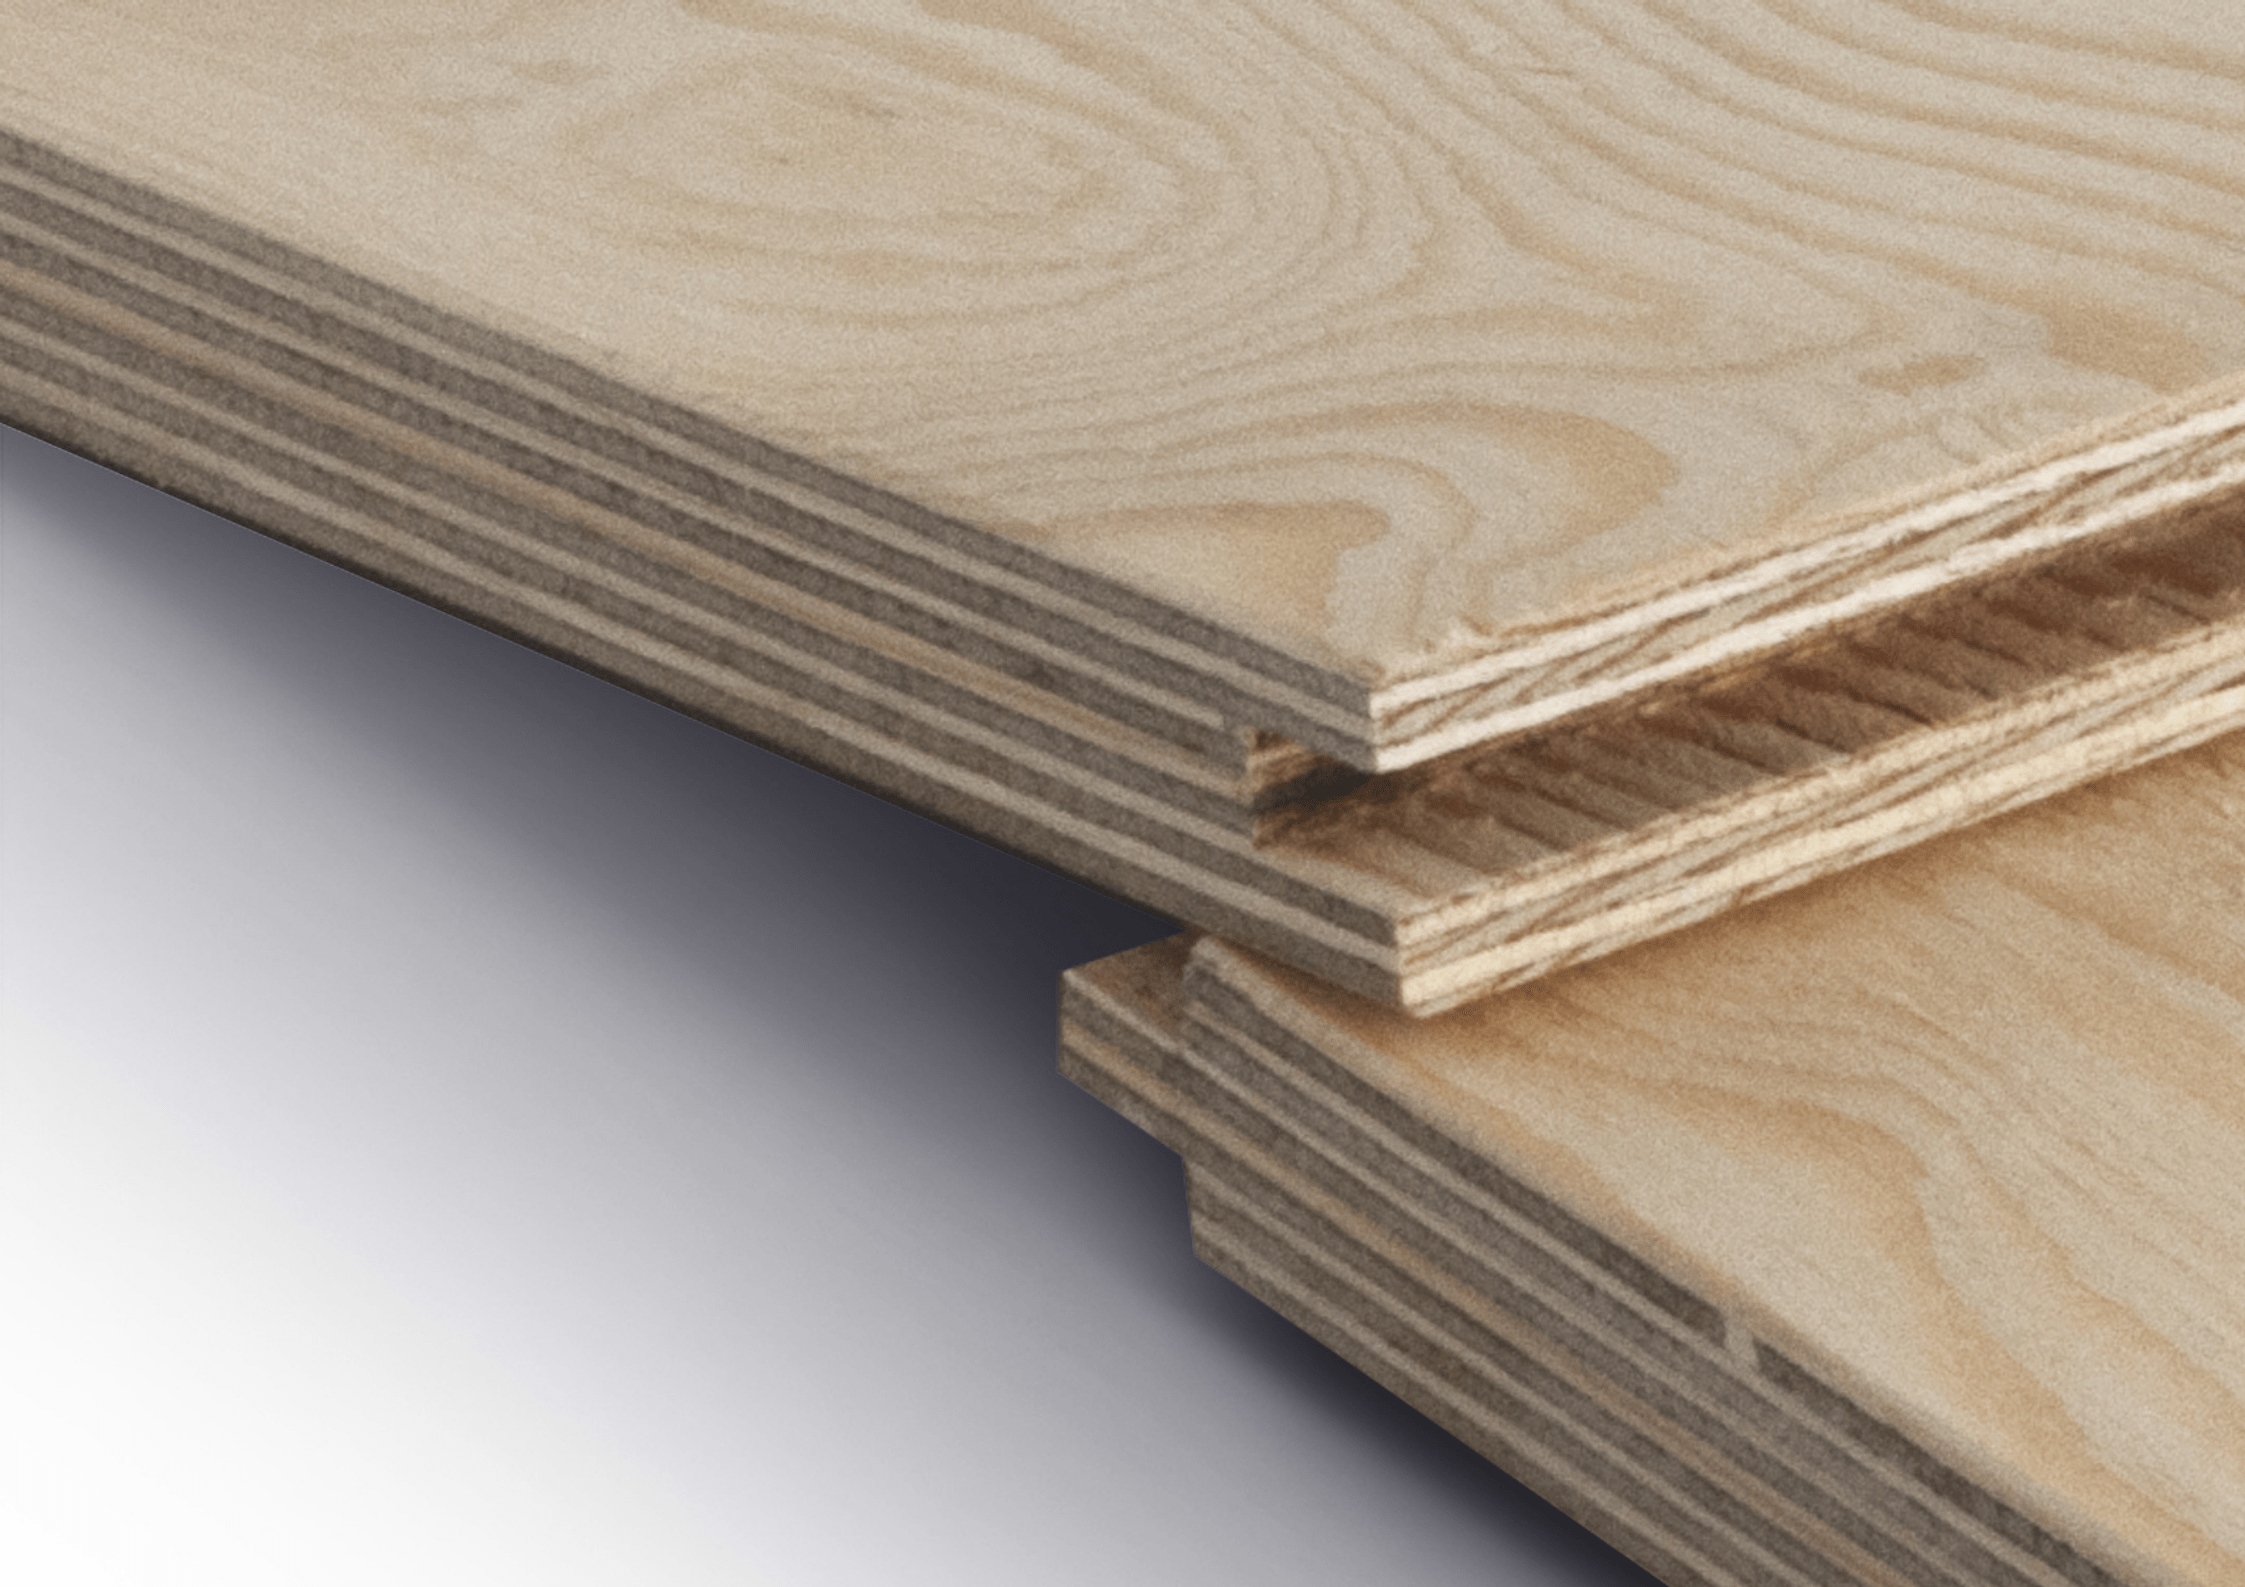 InsulationUK Grade 3 - T&G 2440 x 600 x 18mm Russian Softwood Plywood Tongue & Groove IUK01053 Russian Softwood Plywood Tongue & Groove | bmdgroup.co.uk